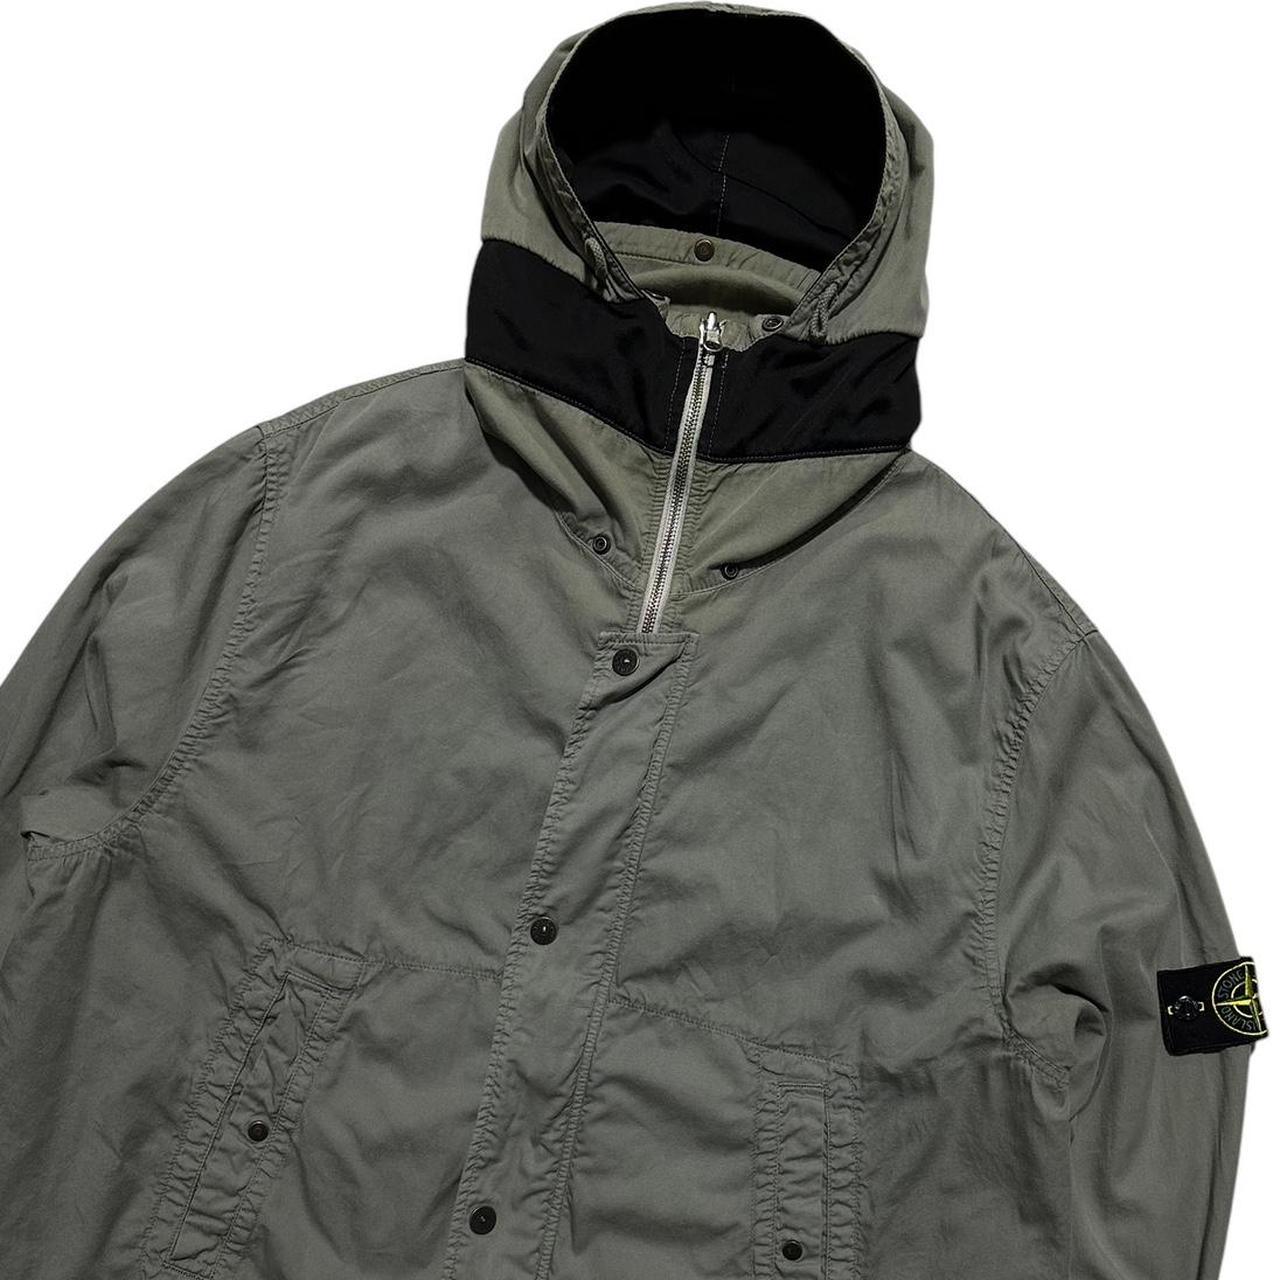 Stone Island Reversible Jacket - Known Source